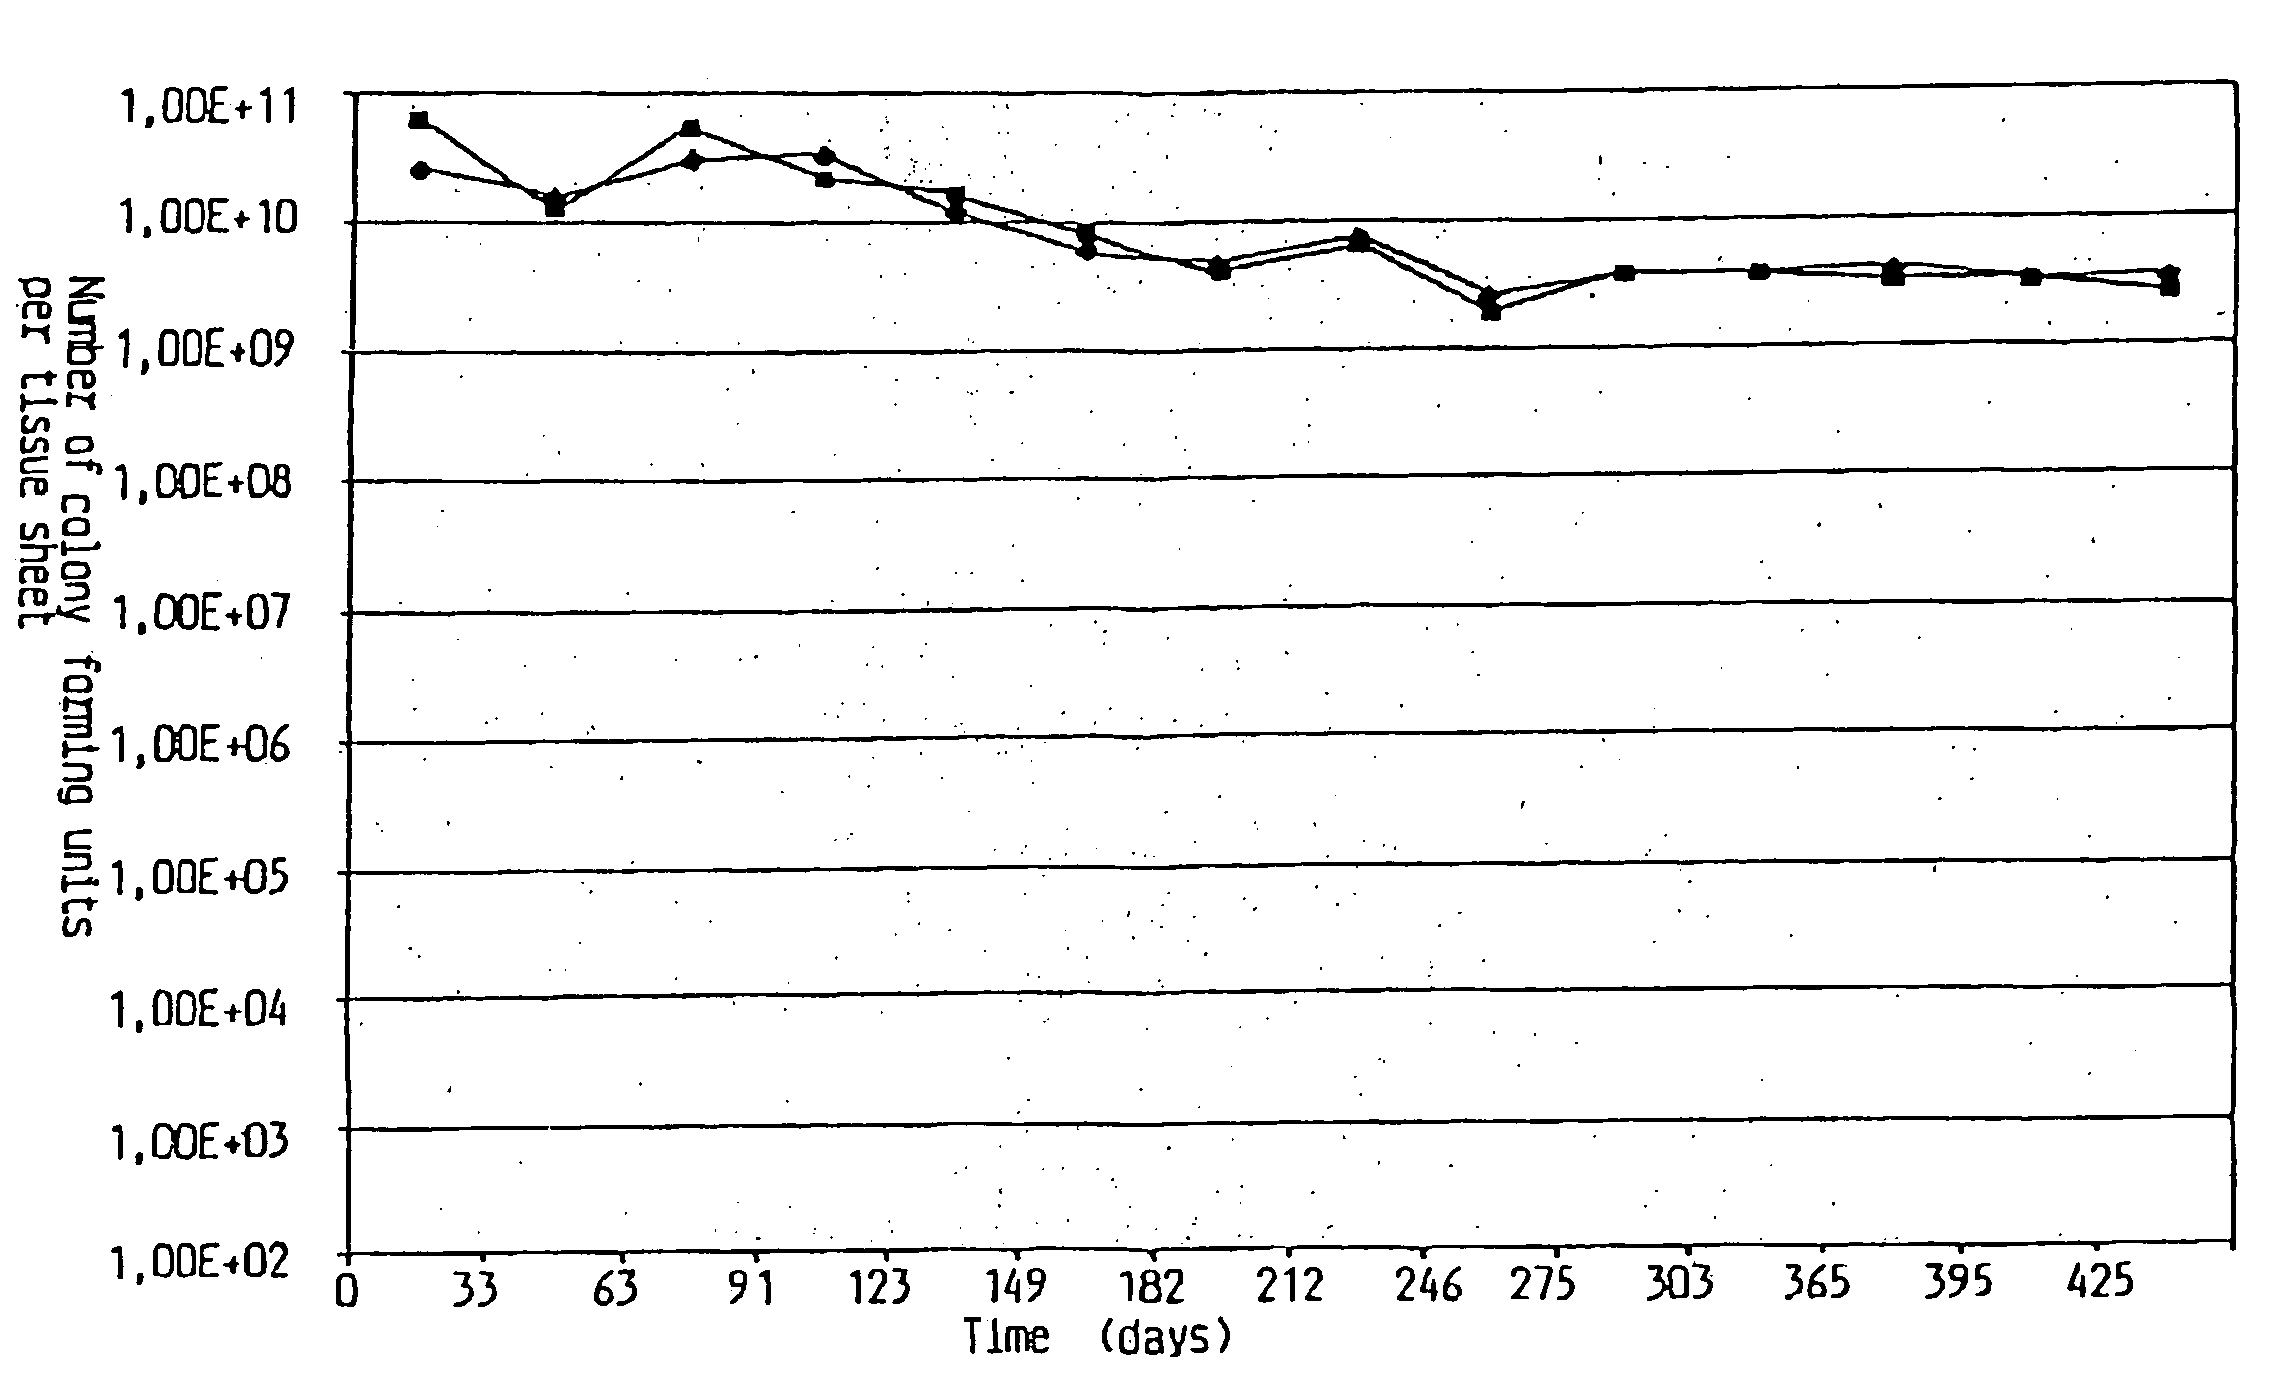 Hygiene tissue with lactic acid producing bacterial strains